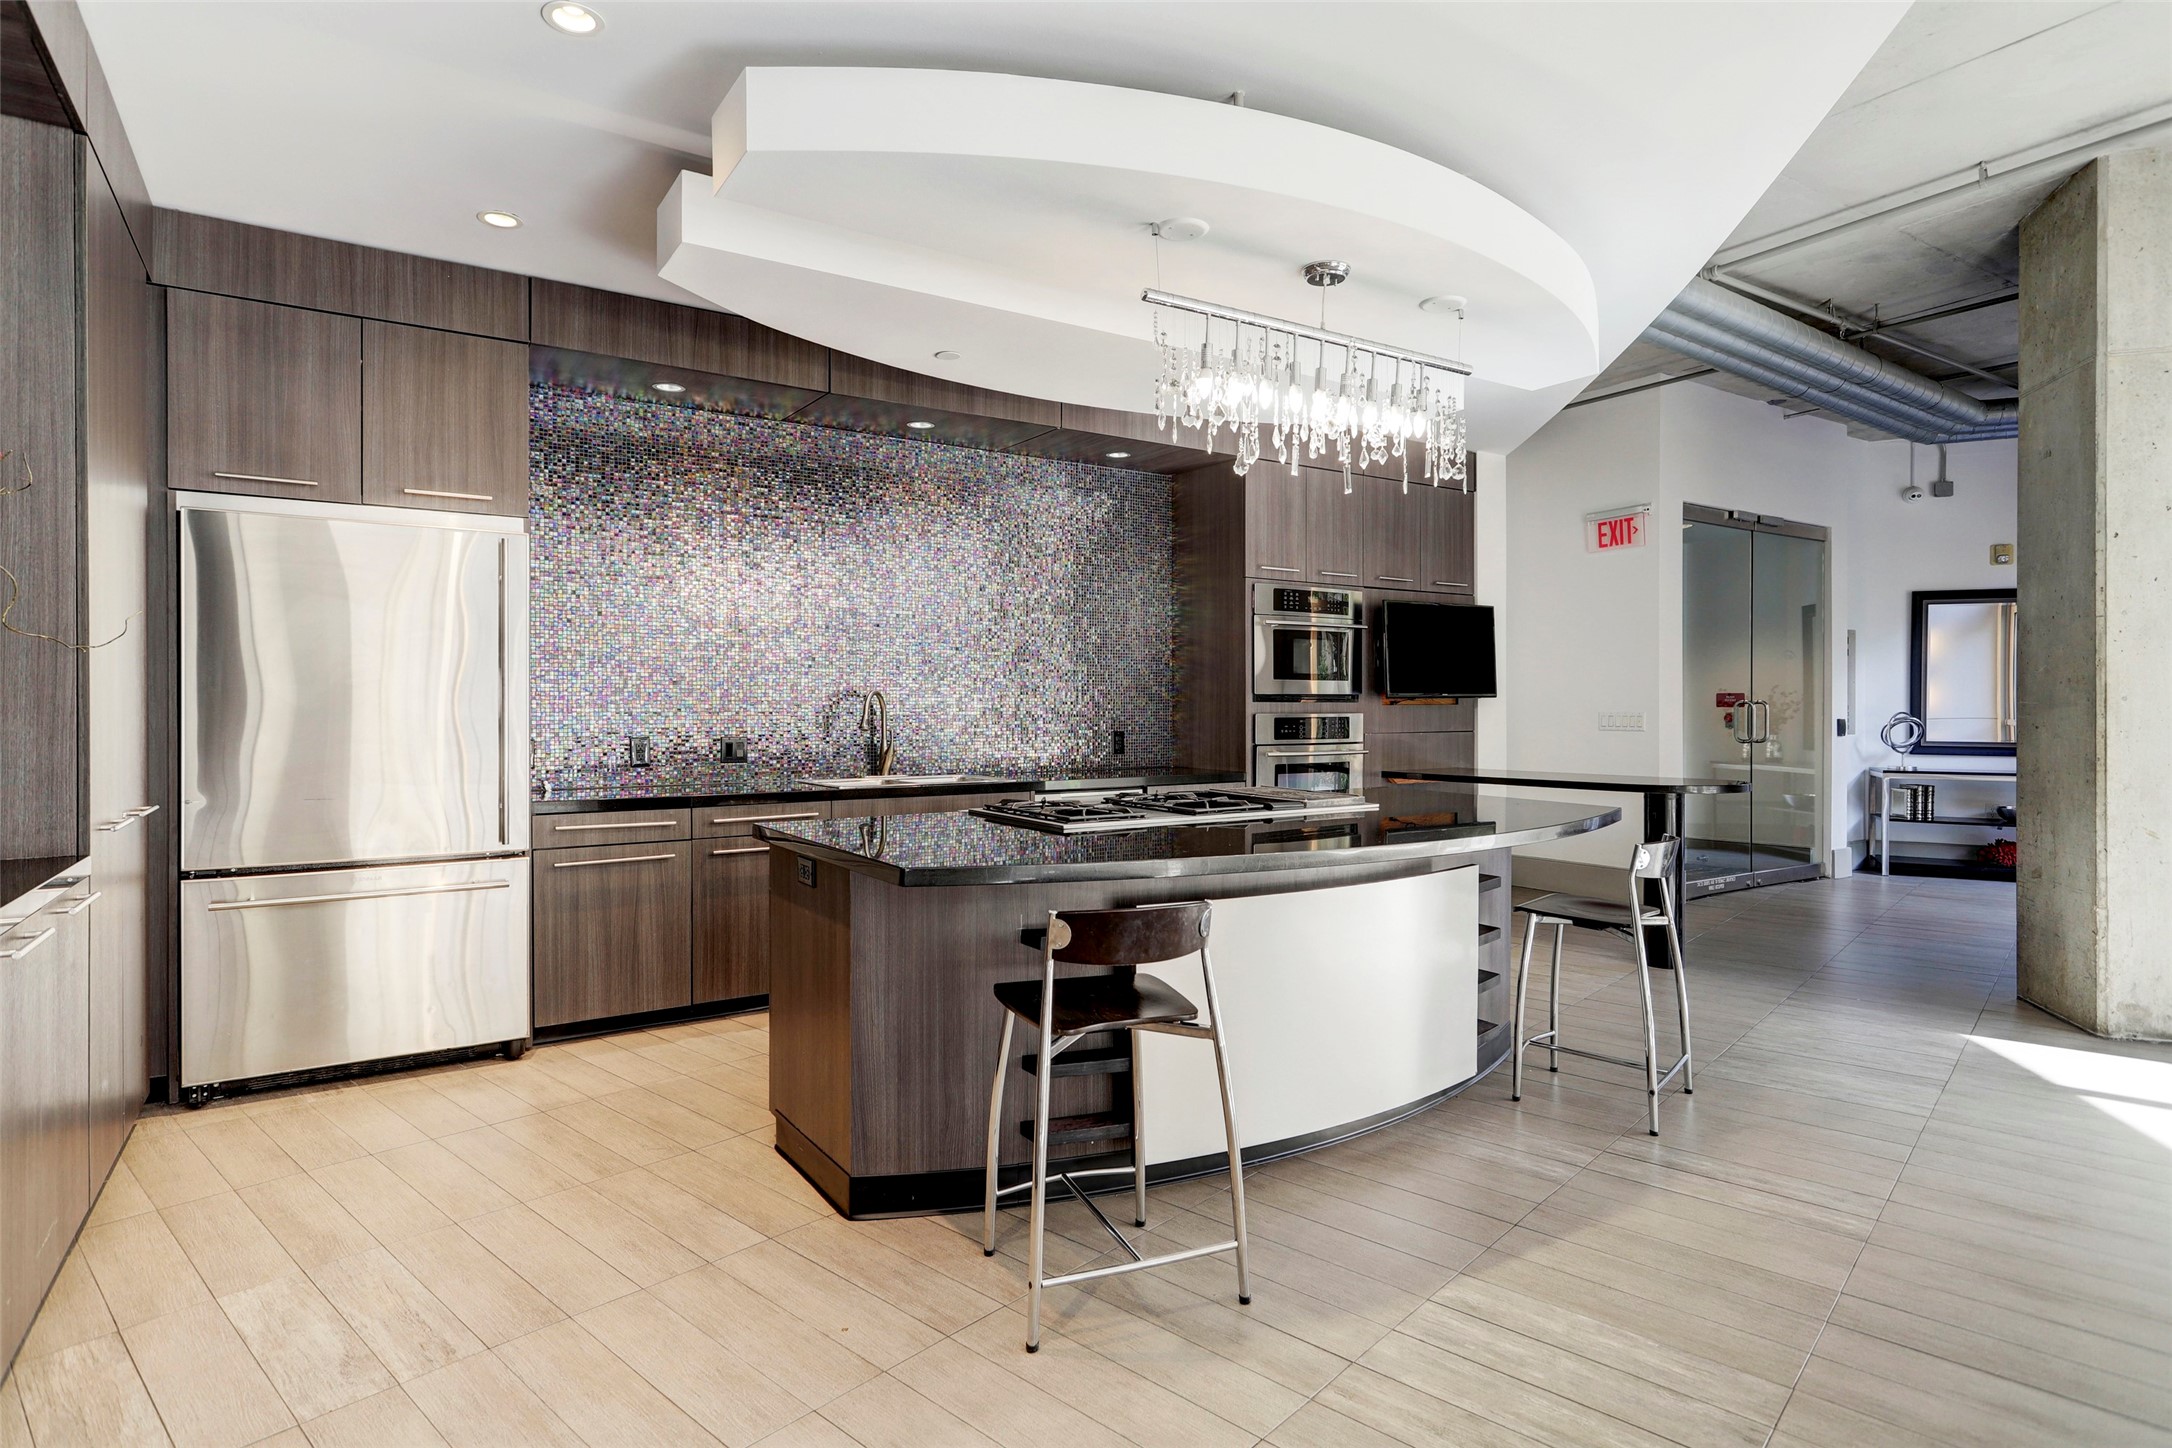 Located next to the living area, this full kitchen can also be reserved for parties.